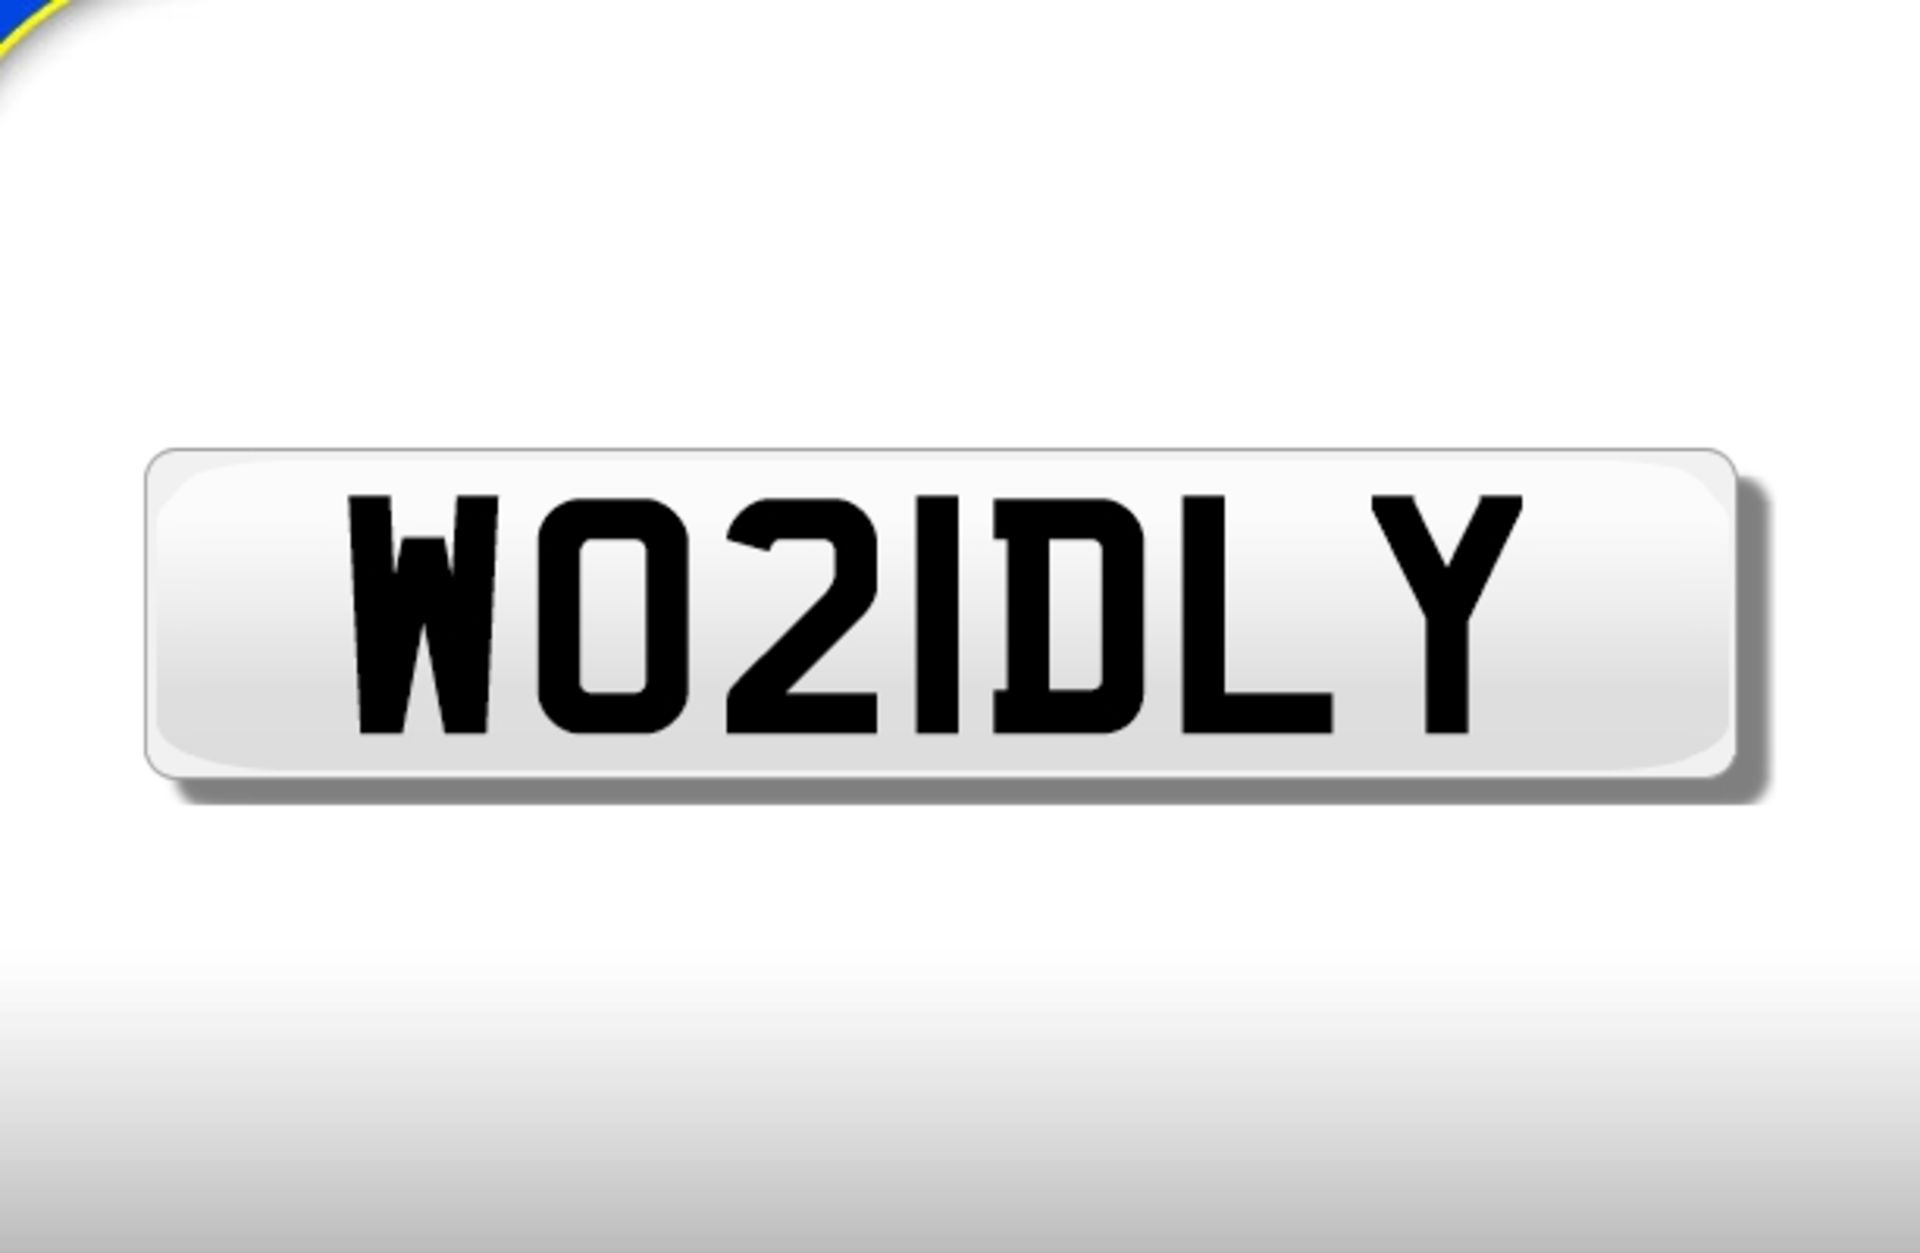 WO21 DLY Worldly Wise Wisdom Knowledge Holy Cherished Private Number Plate 786